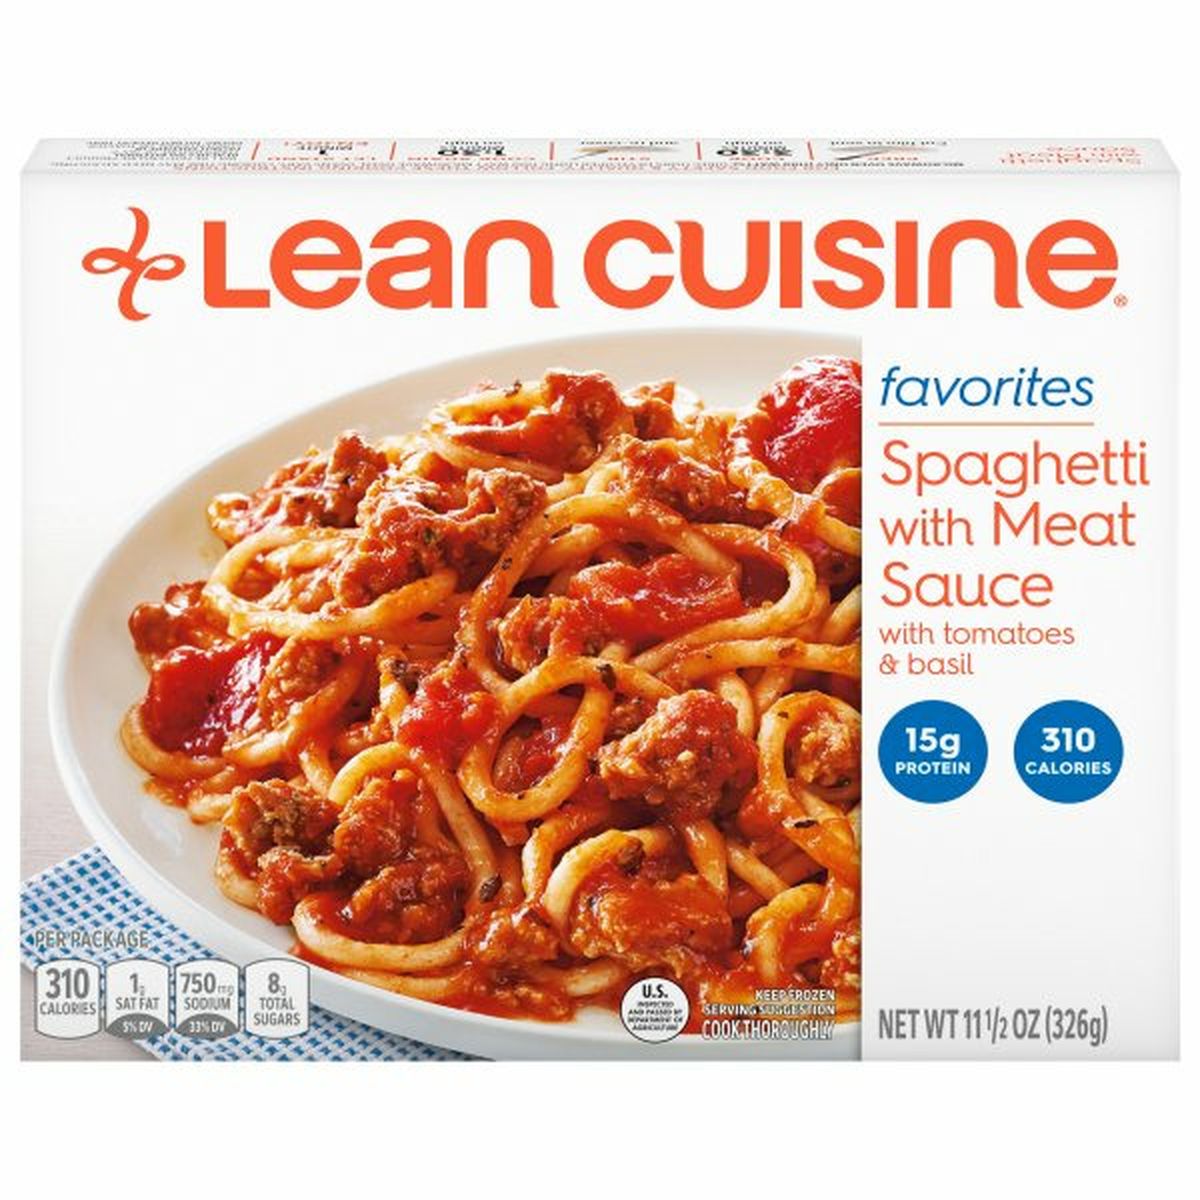 Calories in Lean Cuisine Spaghetti with Meat Sauce